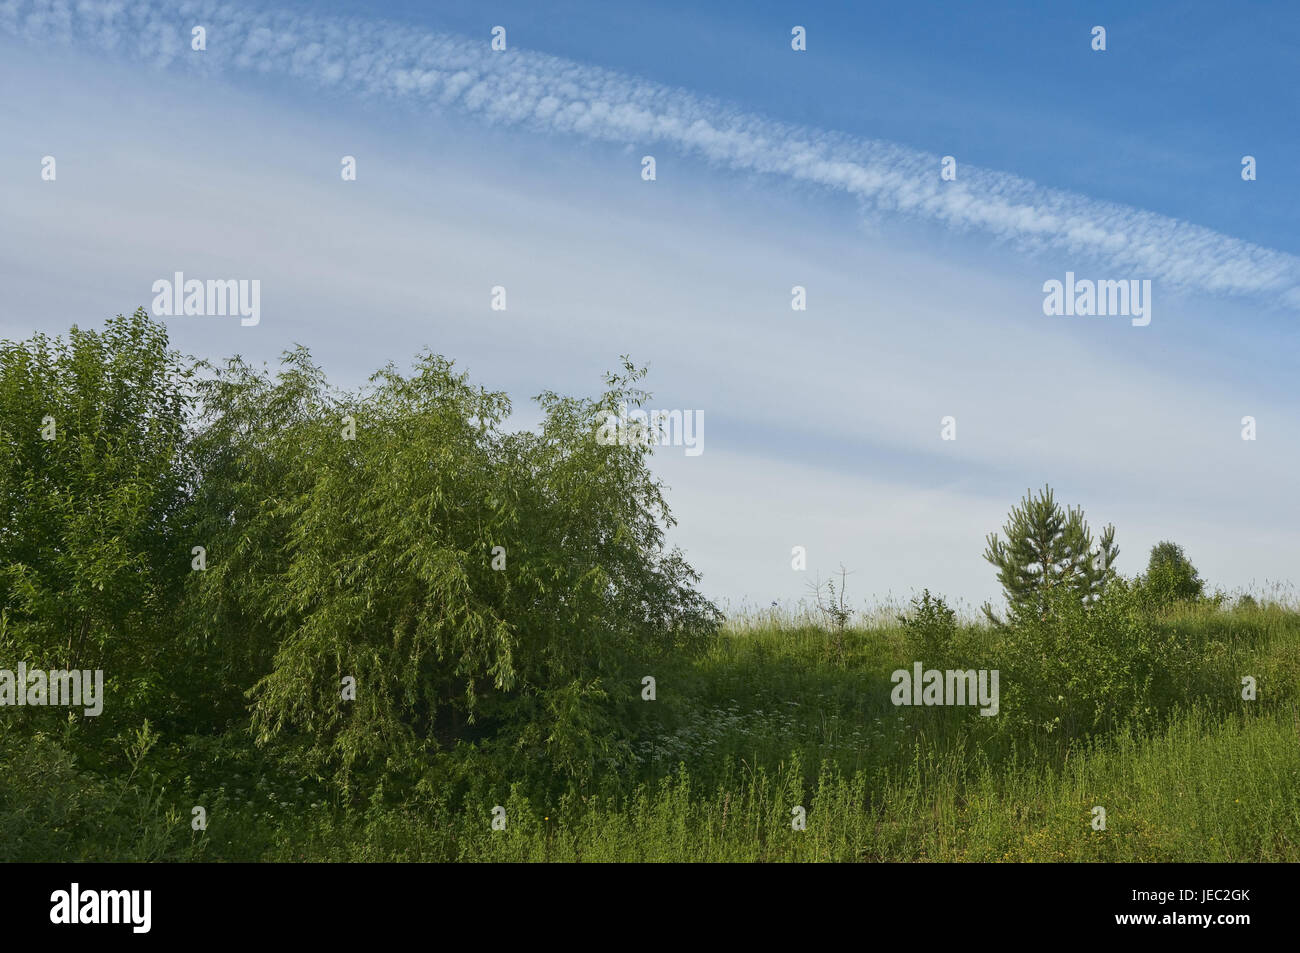 Summer tag, nature, summer, season, sky, blue, sunshine, grass, bushes, grass, tree, meadow, scenery, clouds, Stock Photo